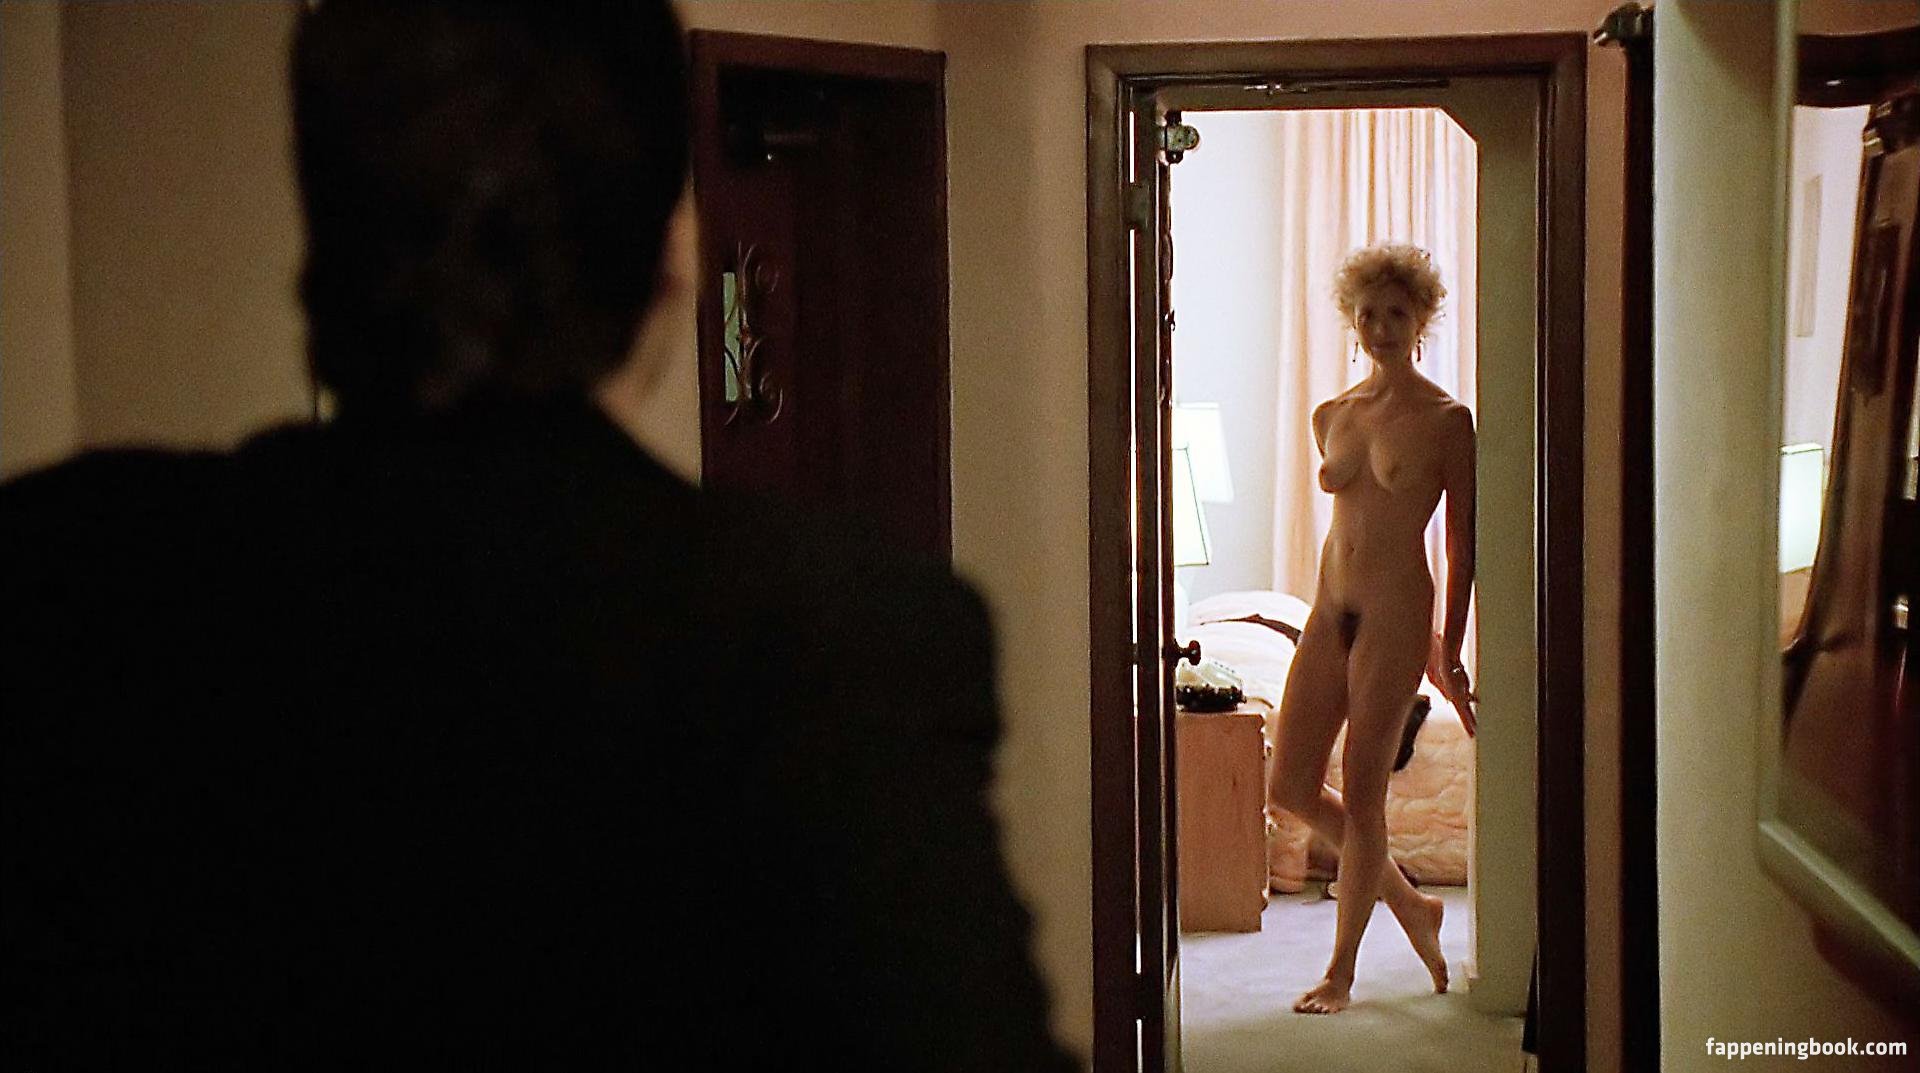 Annette Bening Nude, The Fappening - Photo #45053 - Fappenin